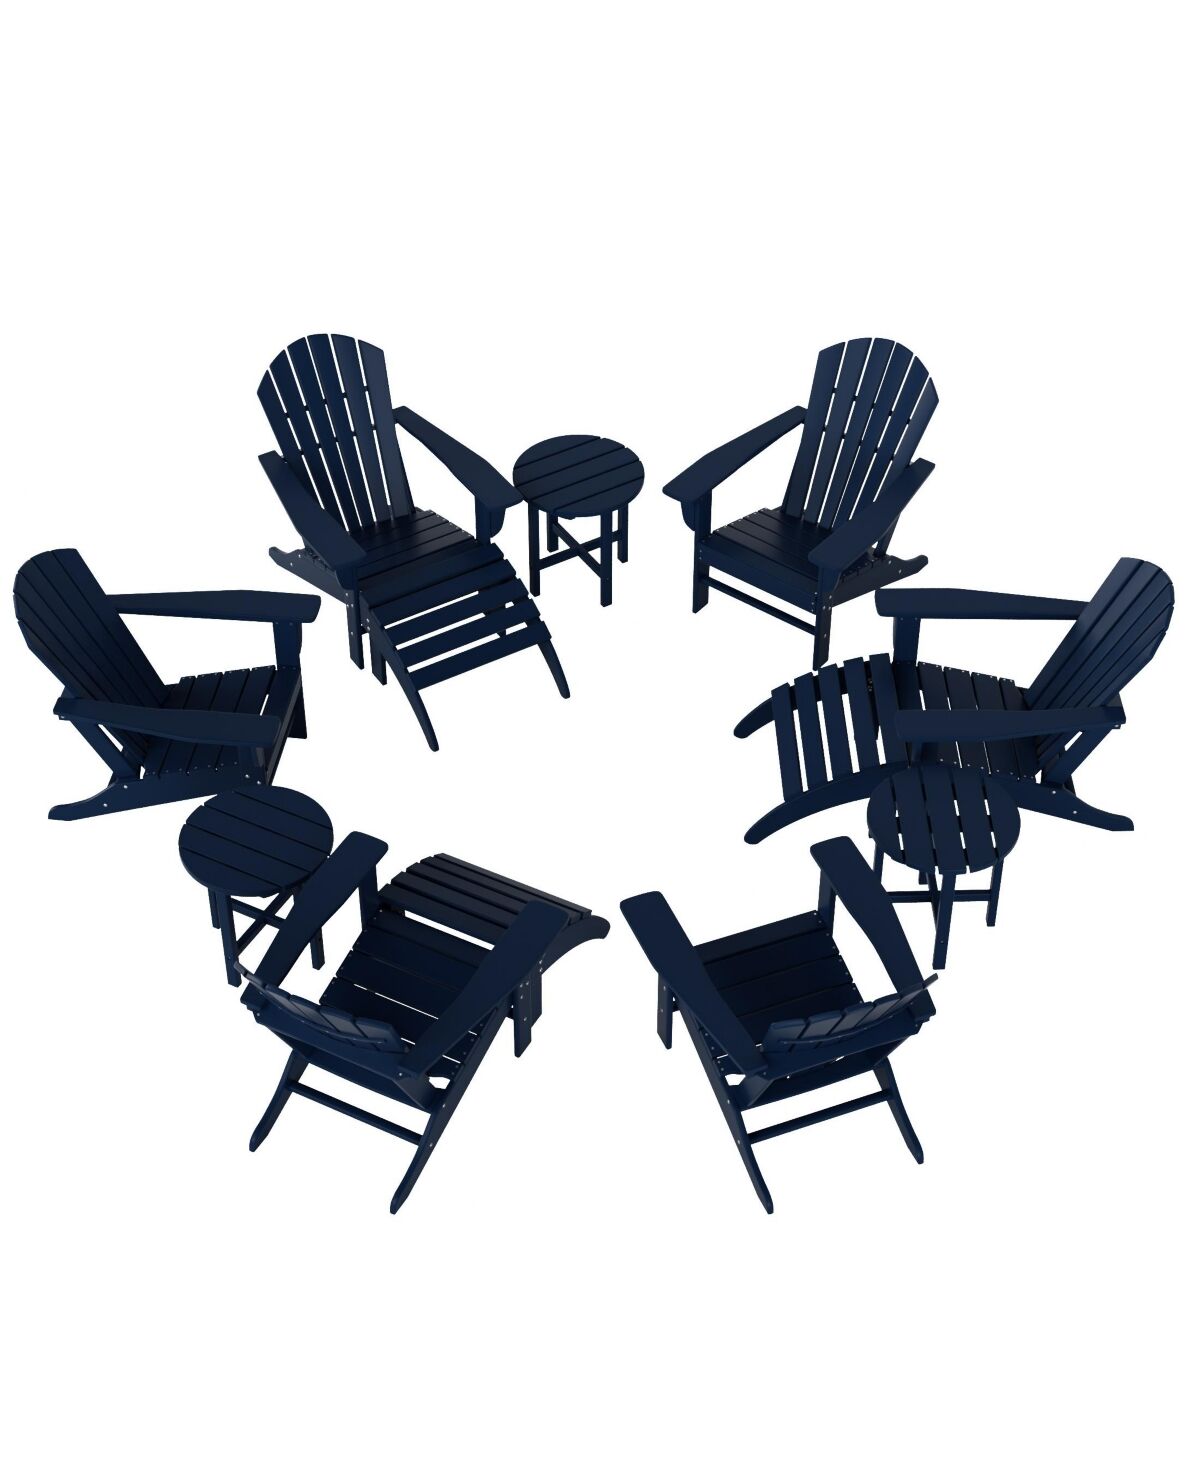 Westintrends 12 Piece Set Outdoor Adirondack Chair With Ottoman Side Table - Navy Blue